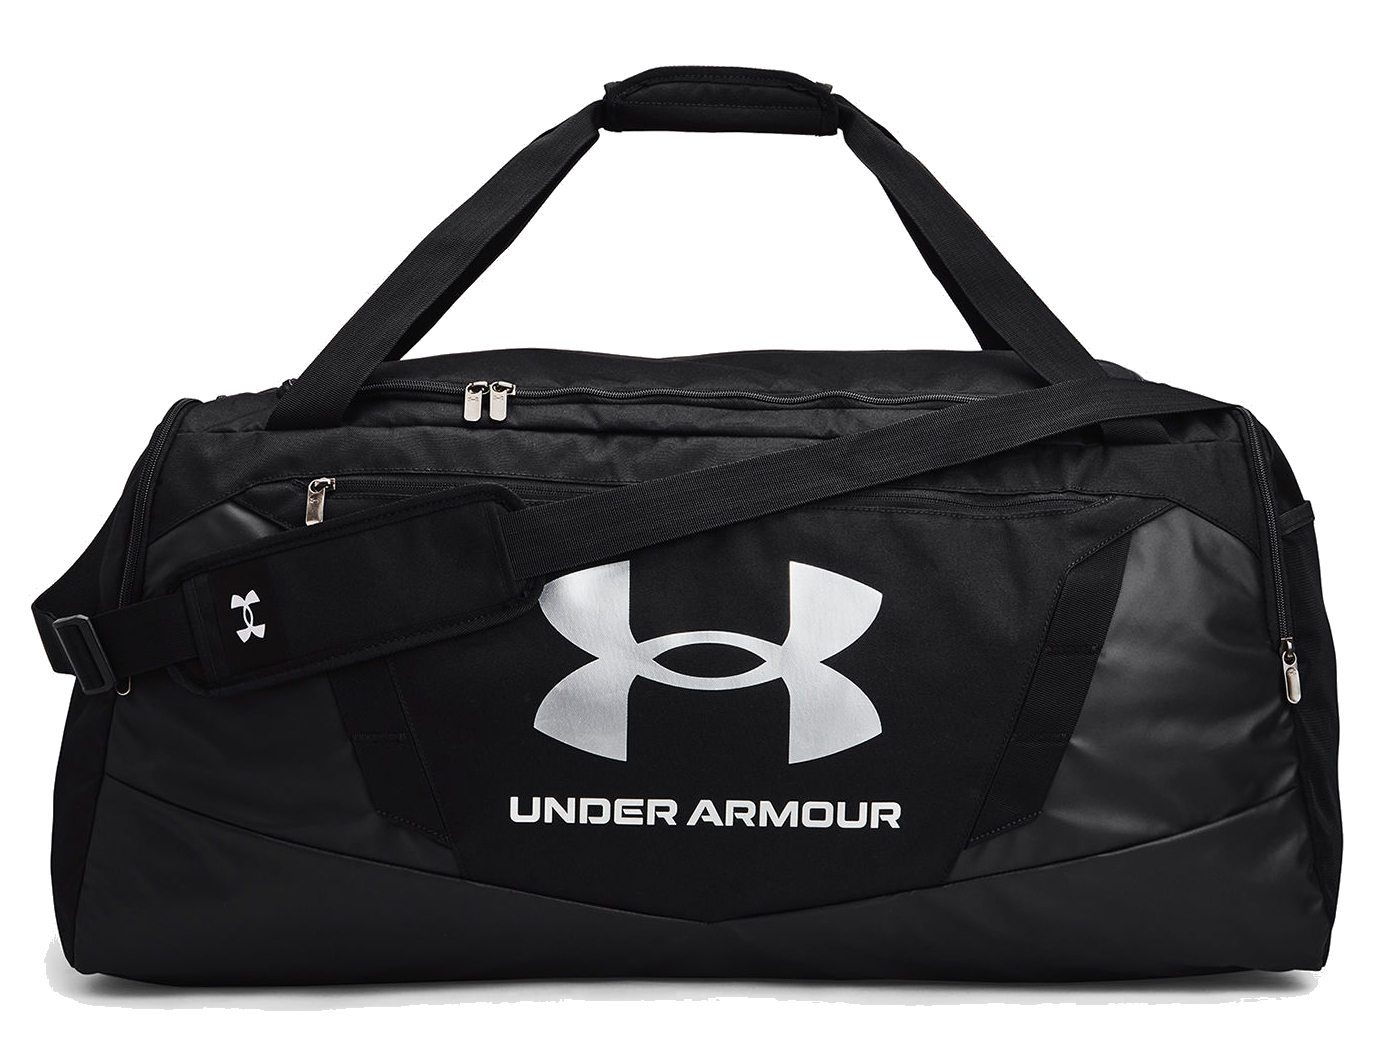 UNDER ARMOUR Undeniable 5.0 Duffle LG-1369224-001